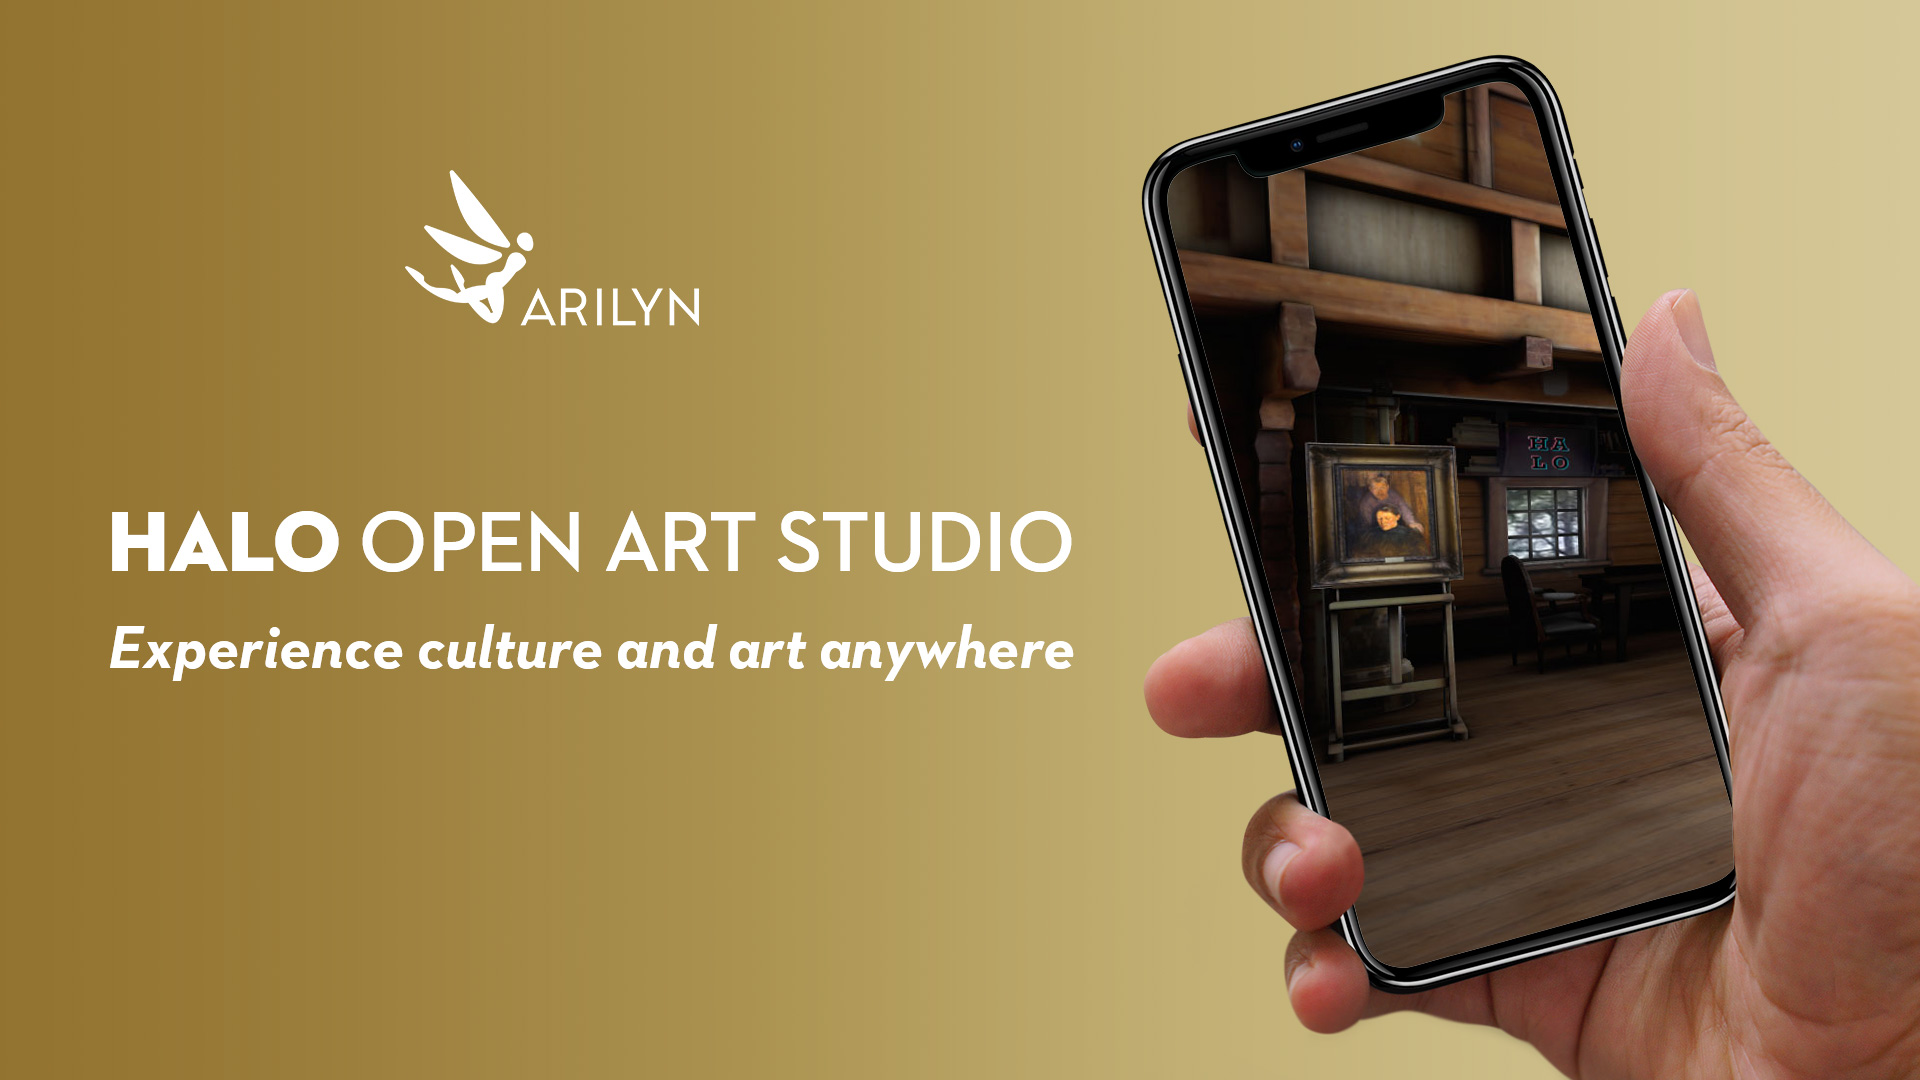 HALO Open Art Studio brings art experience right to your living room